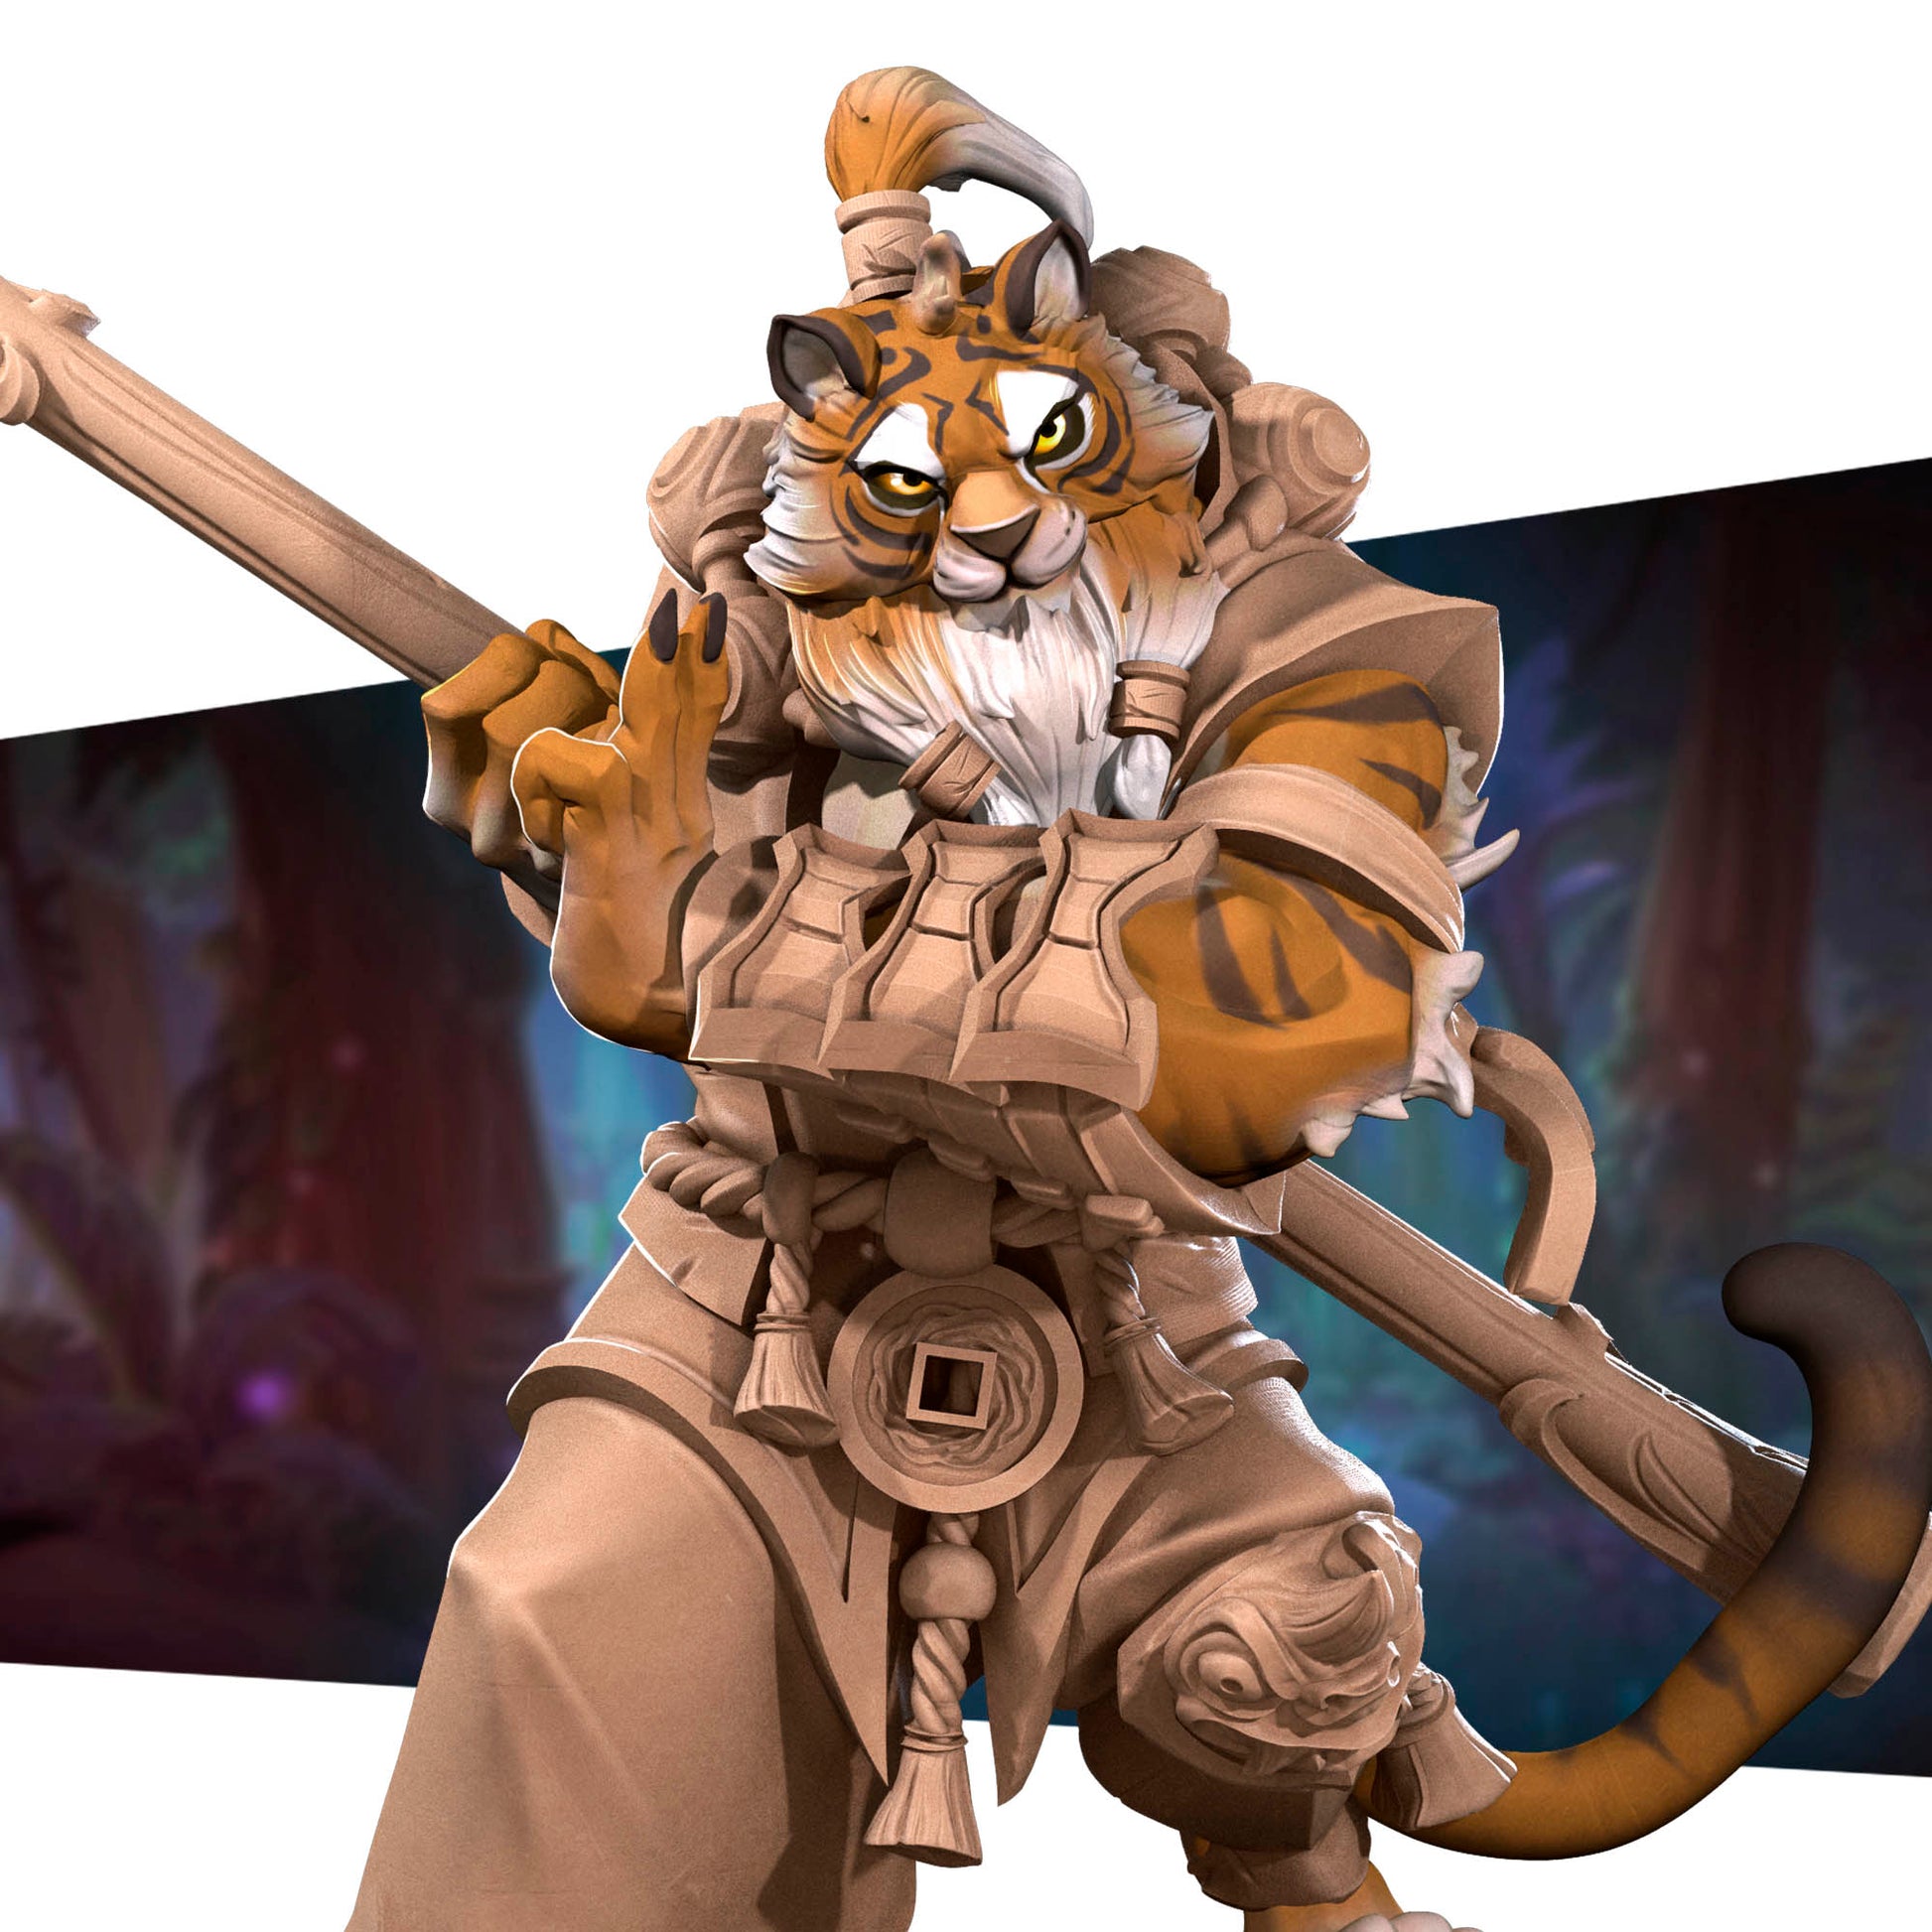 DnD Miniature - Monk - Tabaxi Ajax 01 Miniature - Monk - Tabaxi sold by DoubleHitShop